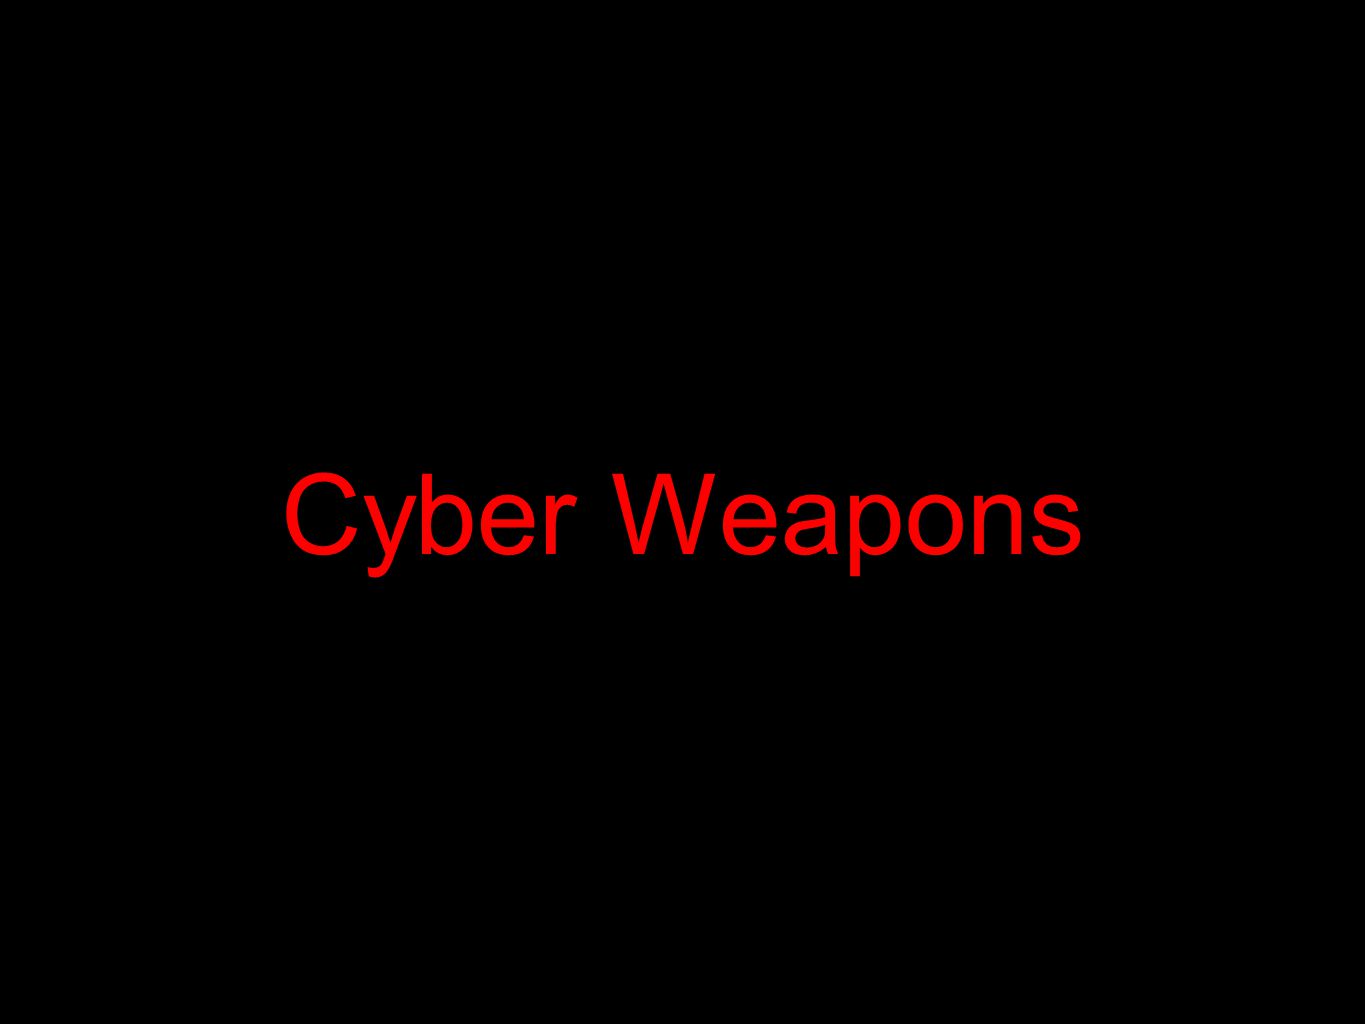 Cyber Weapons We now compare the use of cyber weapons to nuclear and biological weapons.